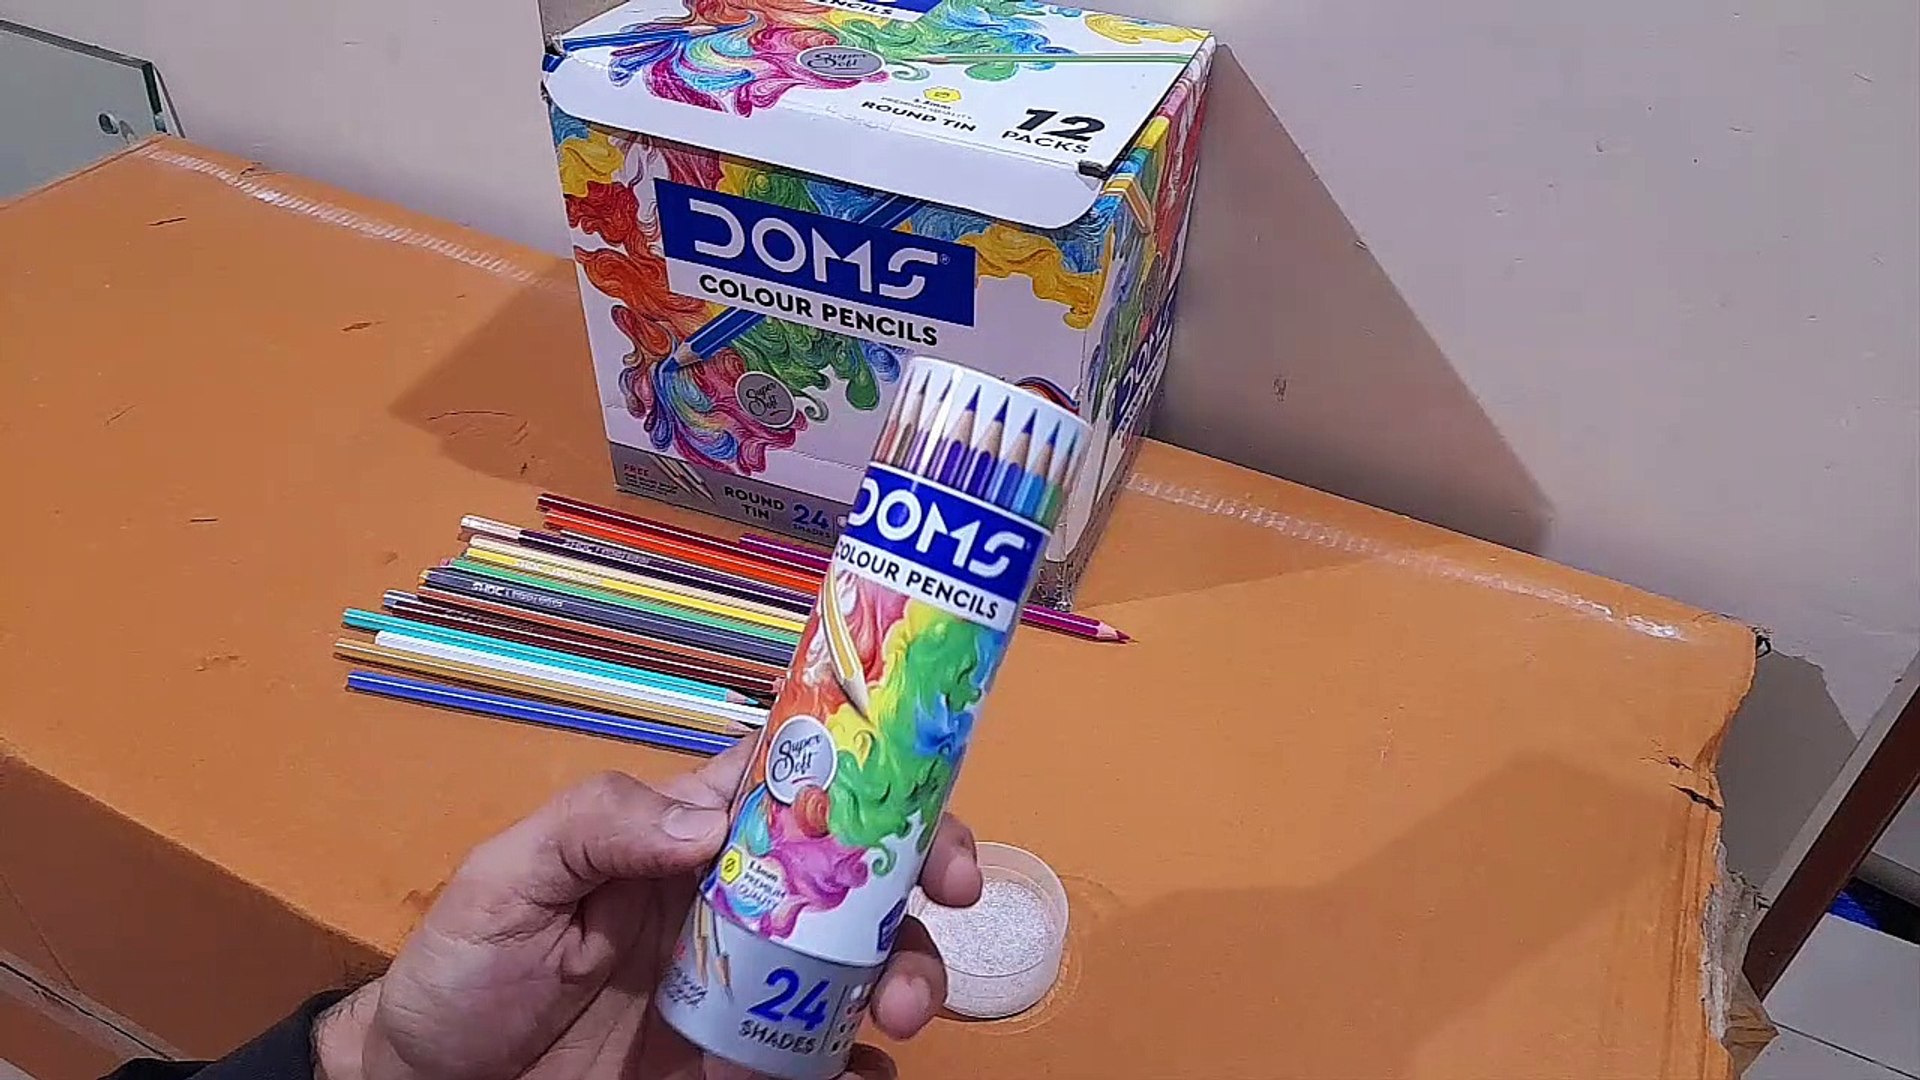 DOMS BRUSH PENS - 14 SHADES, UNBOXING + REVIEW